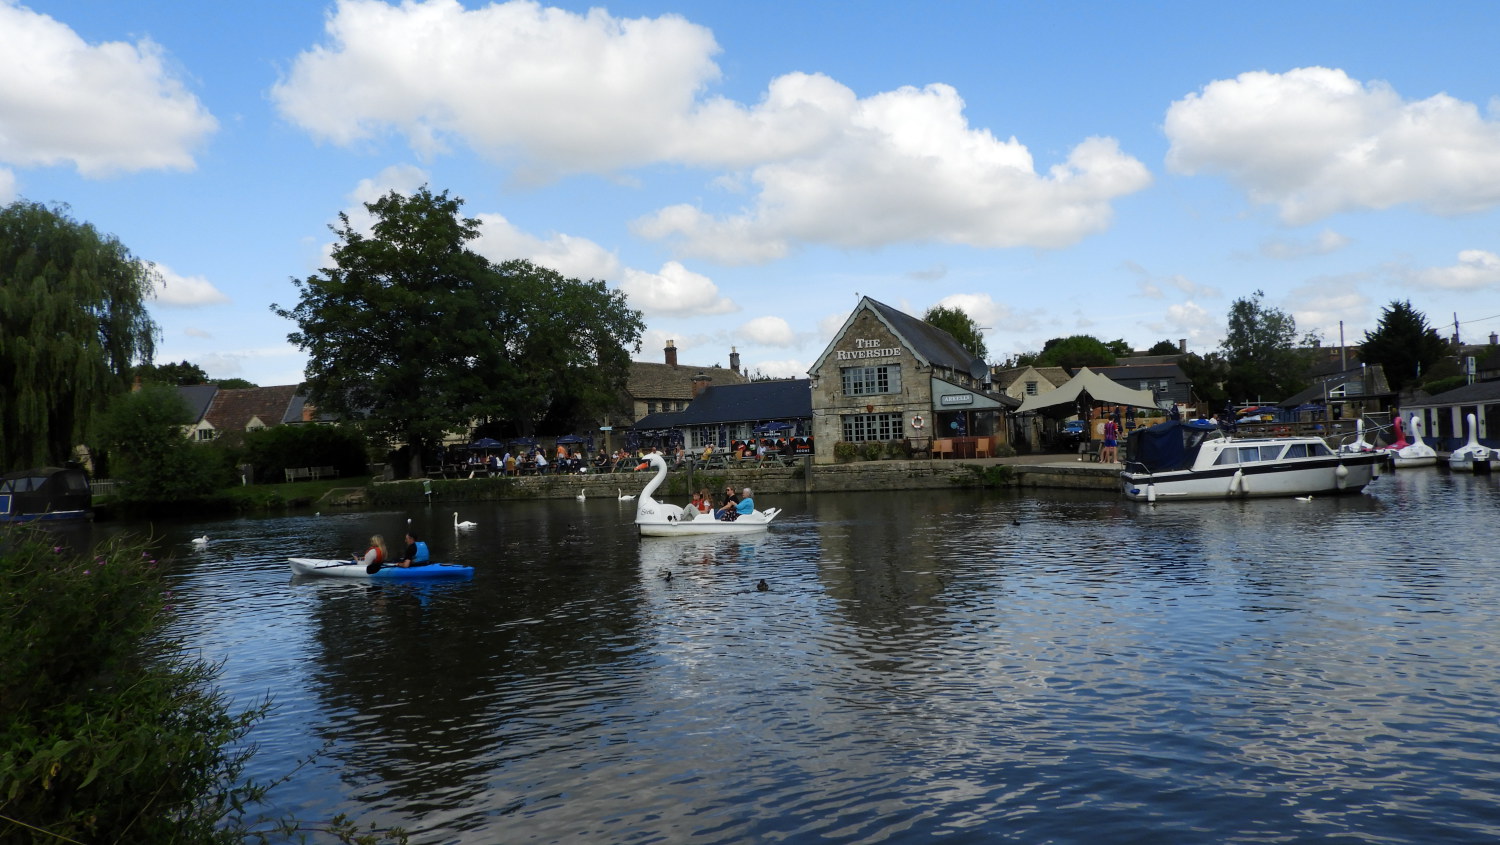 River Thames at Lechlade